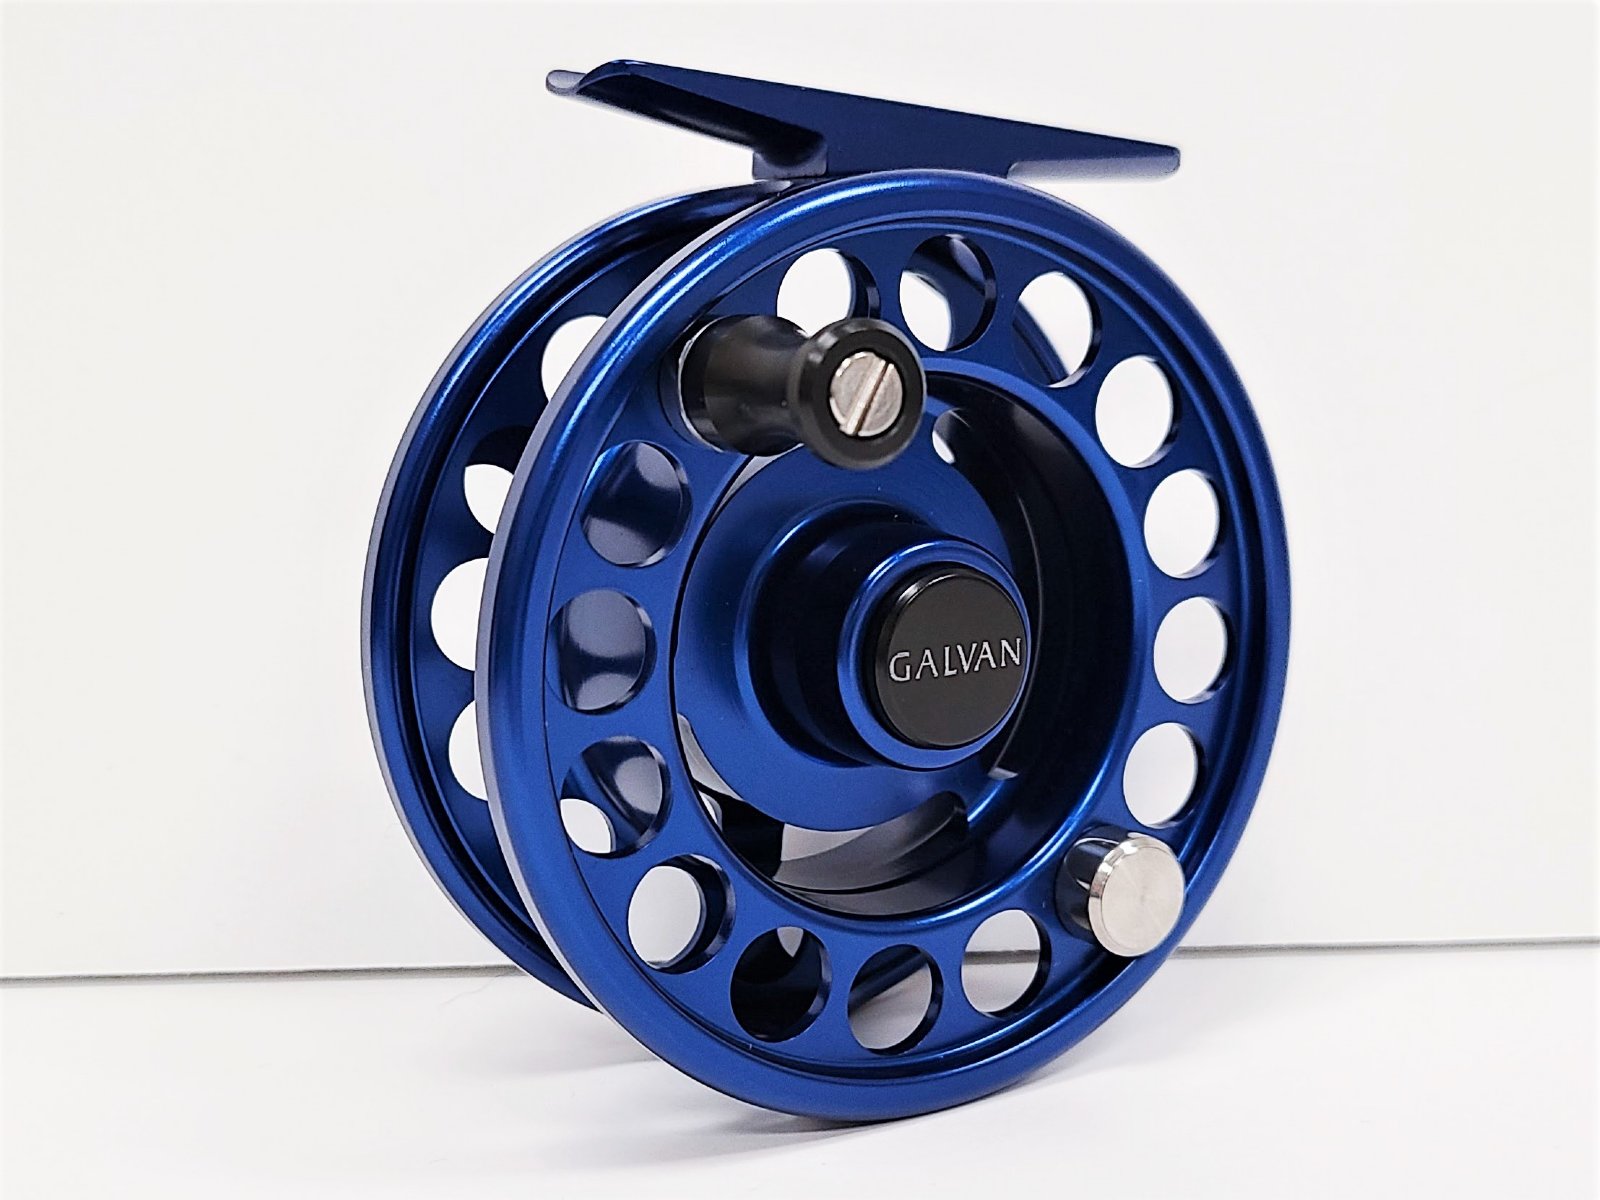  Galvan Rush Light 3 Fly Reel, Black - with $20 Gift Card :  Sports & Outdoors